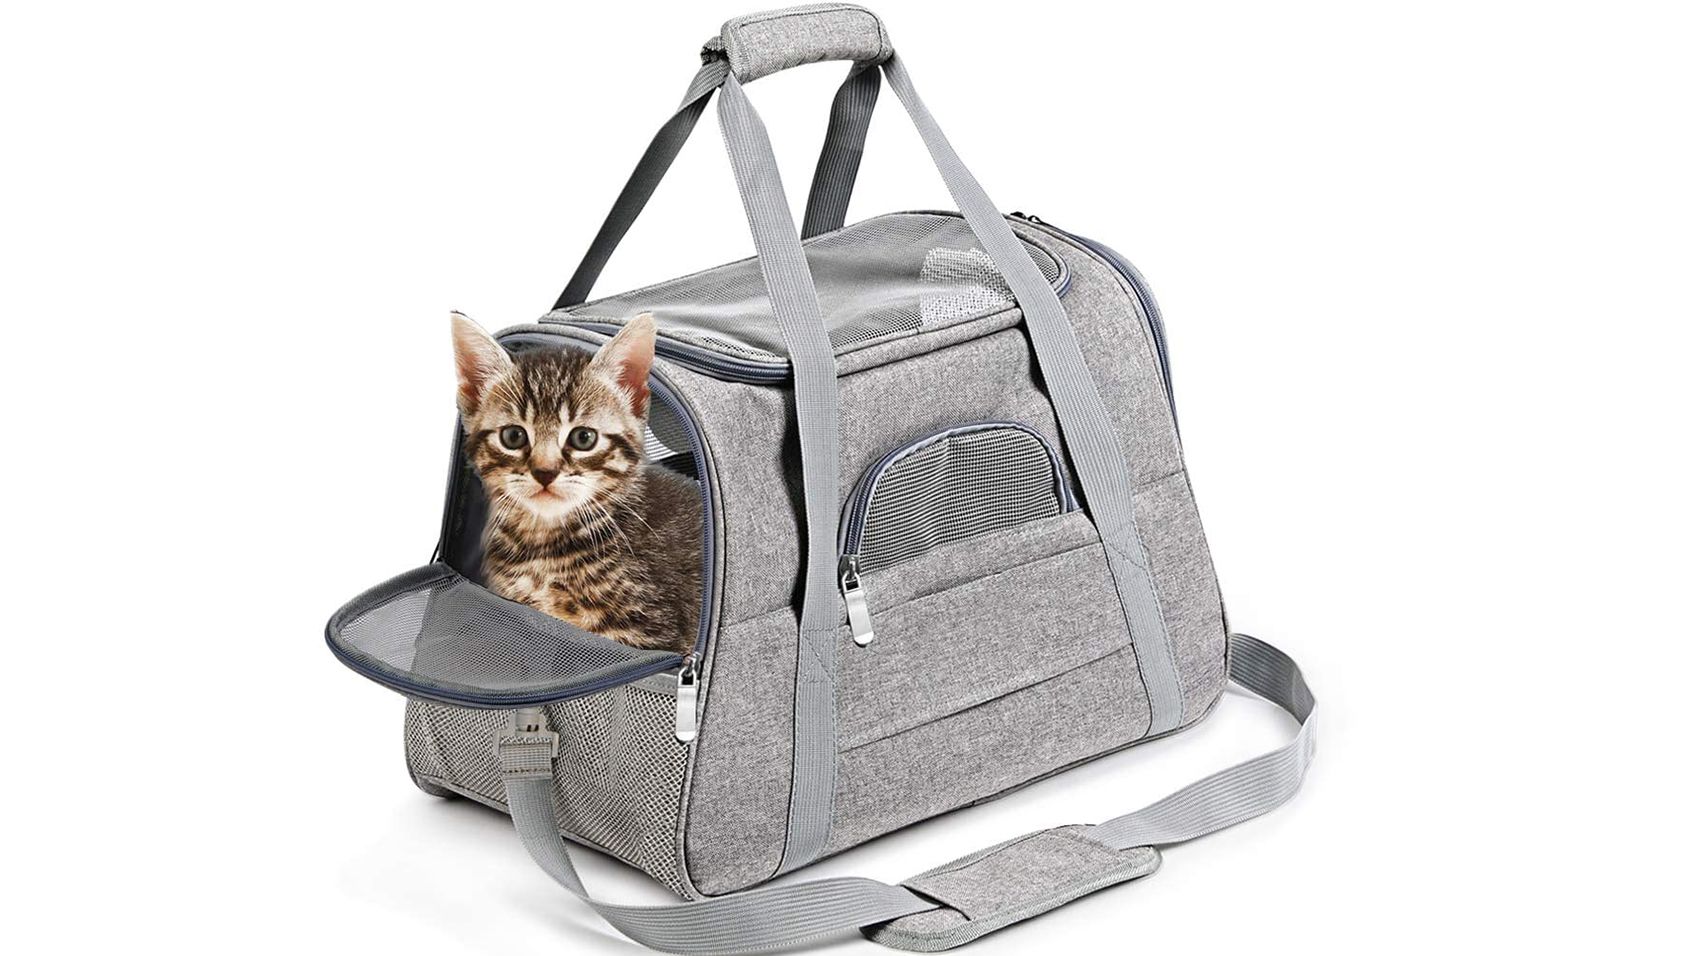 15 Of The Best Pet Carriers You Can Get On